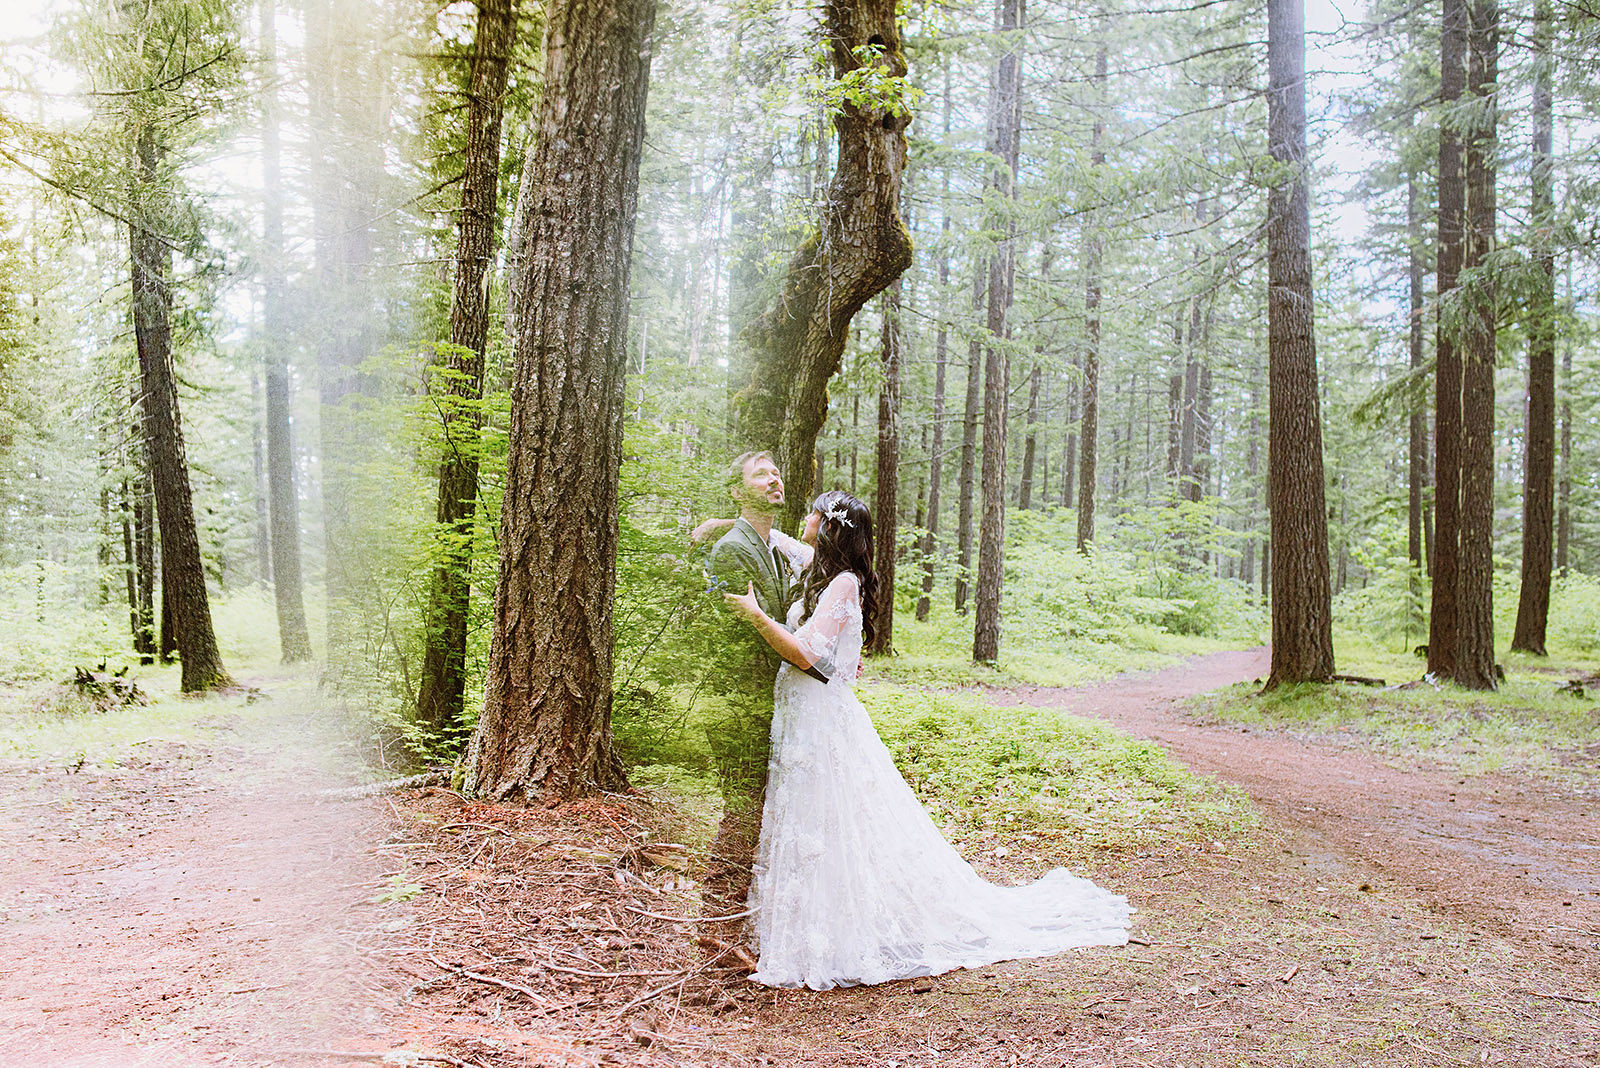 Portraits of the Bride and Groom fading into the forest - Trout Lake Wedding, WA